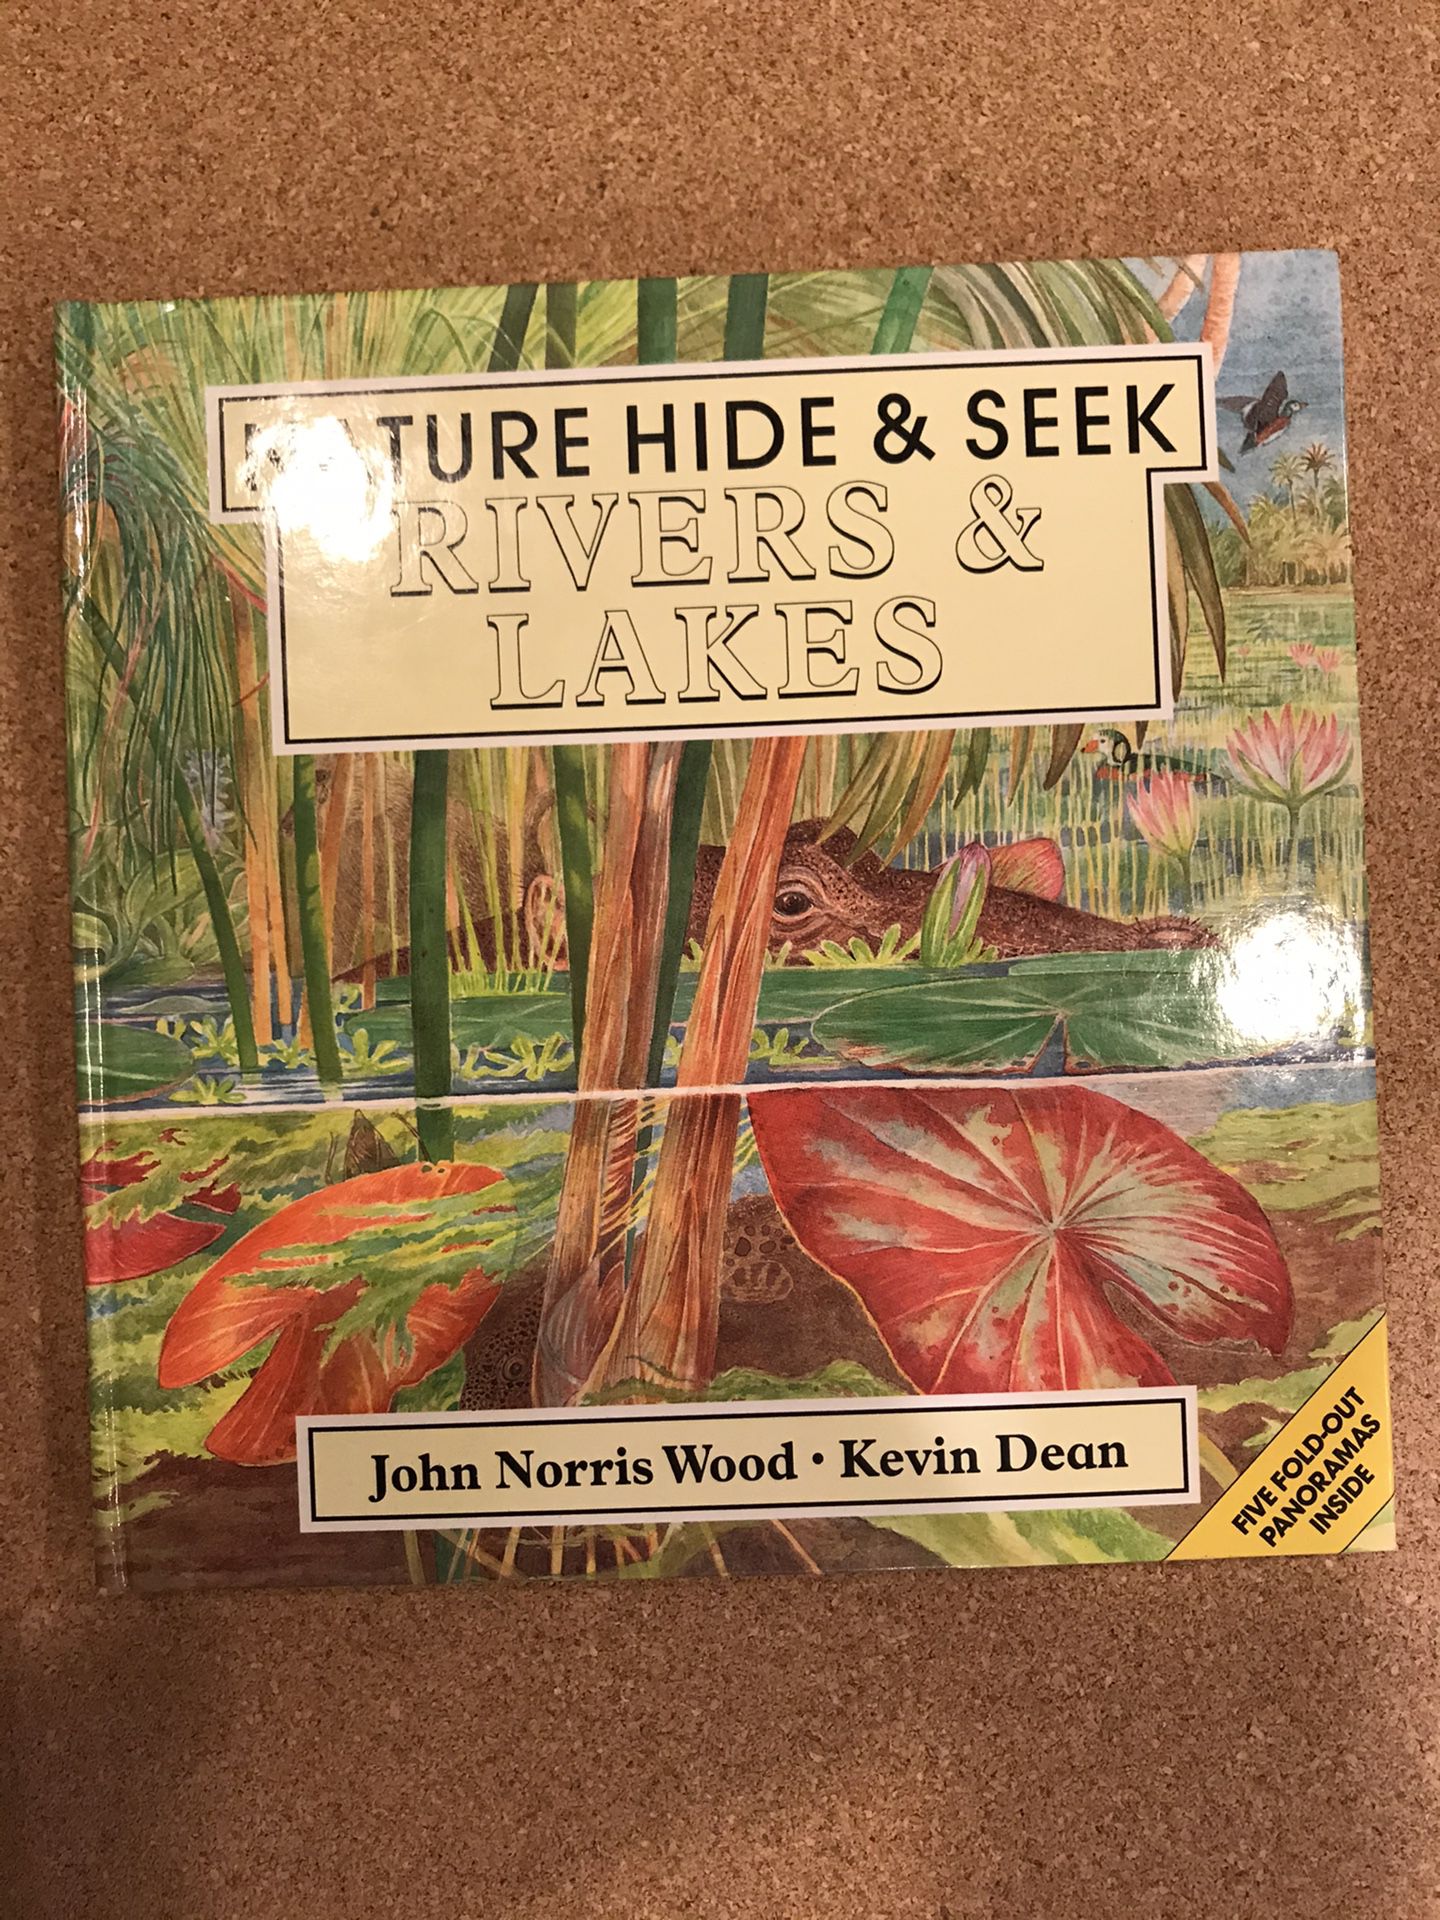 Nature hide&seek rivers & lakes book with five fold-our panoramas